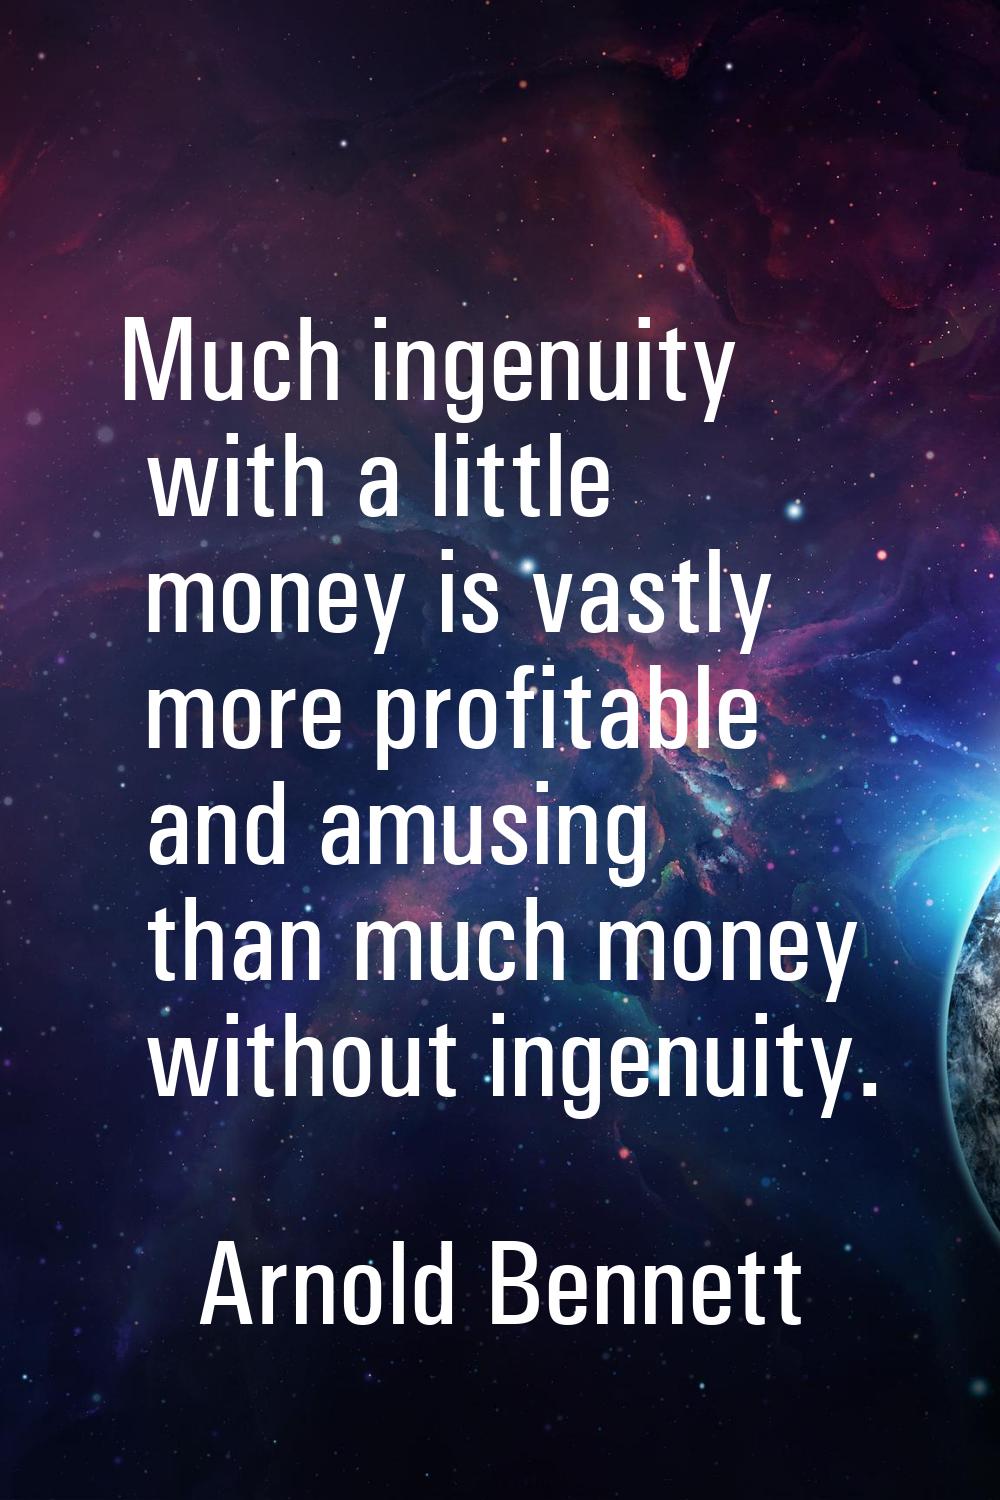 Much ingenuity with a little money is vastly more profitable and amusing than much money without in